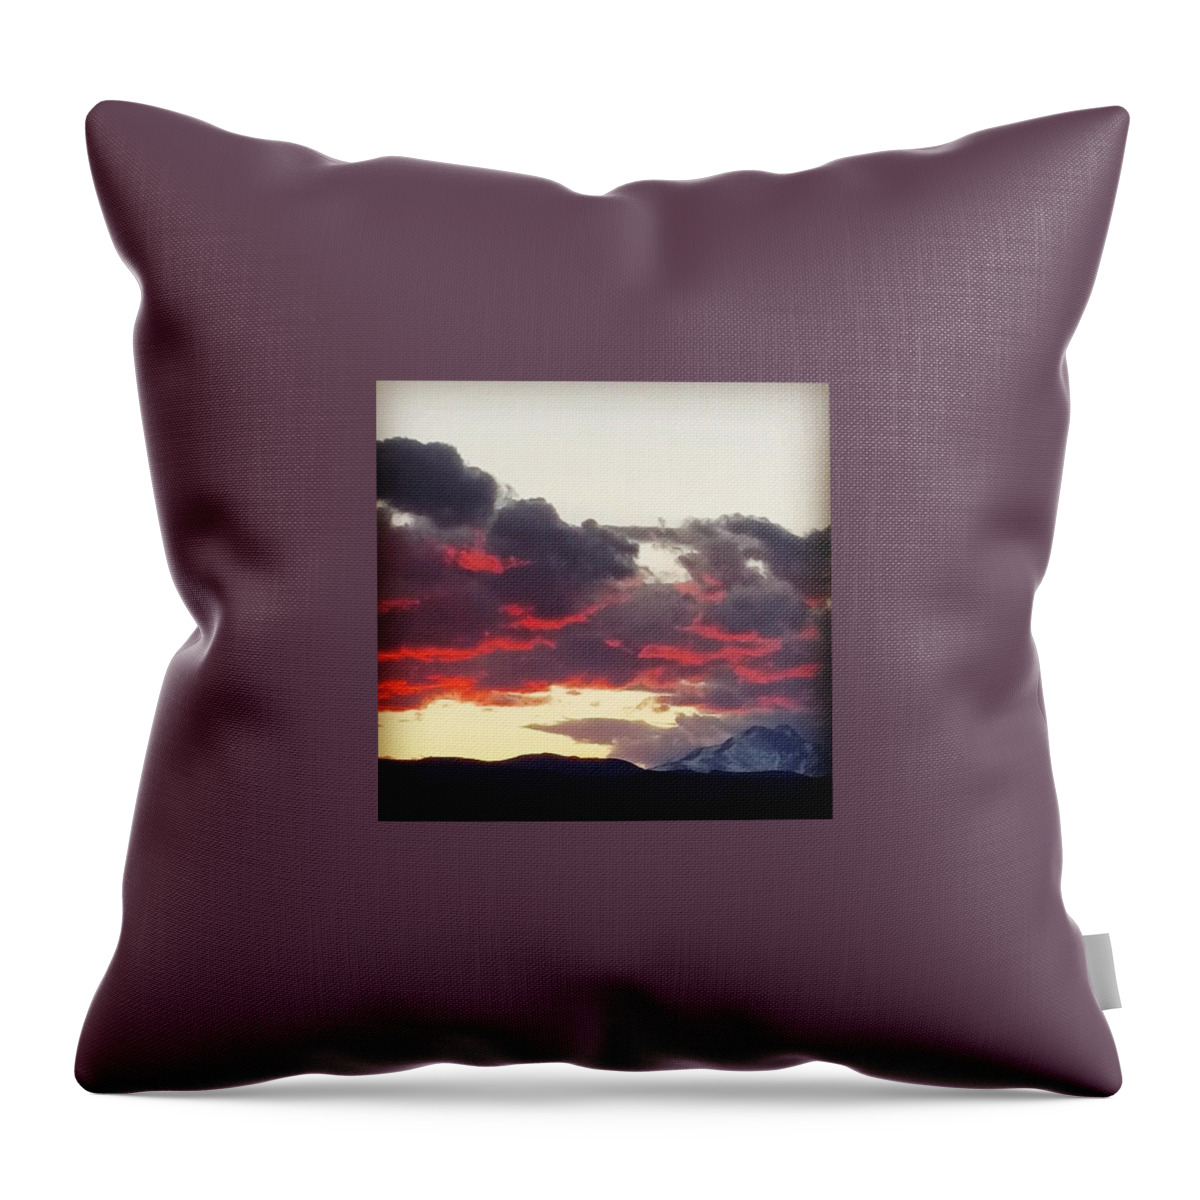 Clouds Throw Pillow featuring the photograph Warm Sky Cold Mountain 2 by Charley Upton